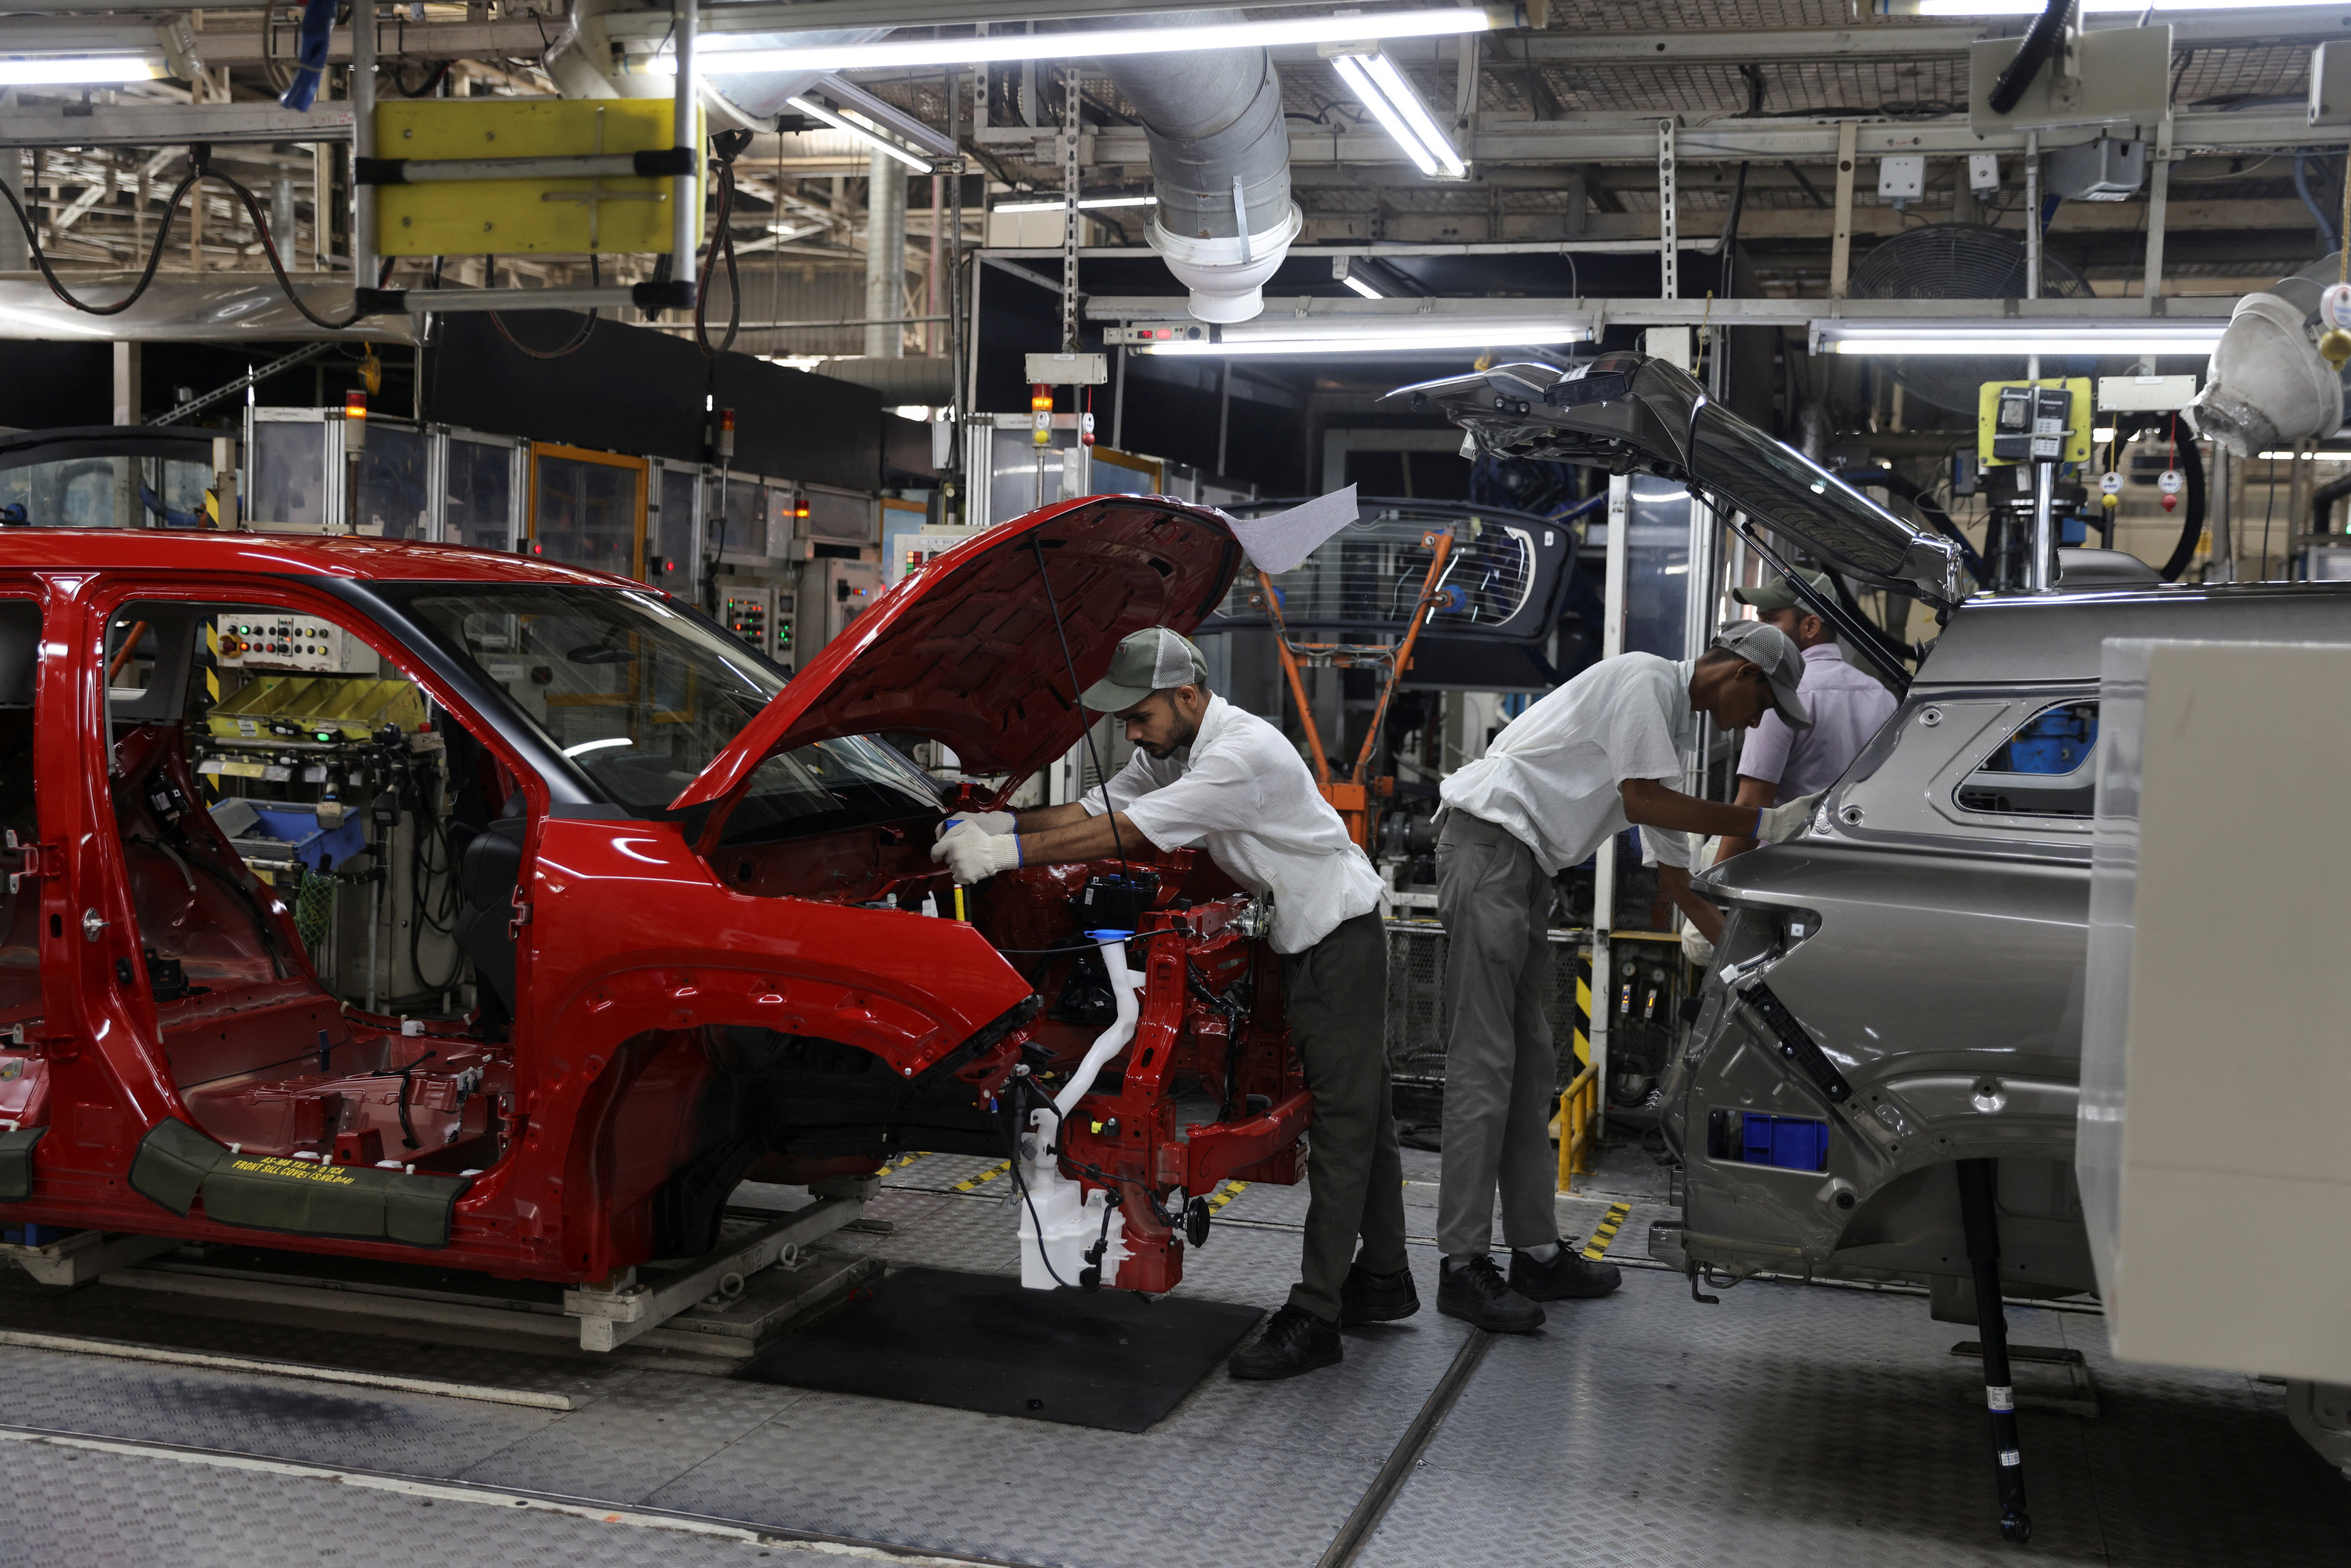 Employees work on an assembly line at the Maruti Suzuki plant in Manesar, in the northern state of Haryana, India, on September 26. India has emerged as a potential alternative for investors amid rising US-China tensions and economic uncertainty. Photo: Reuters